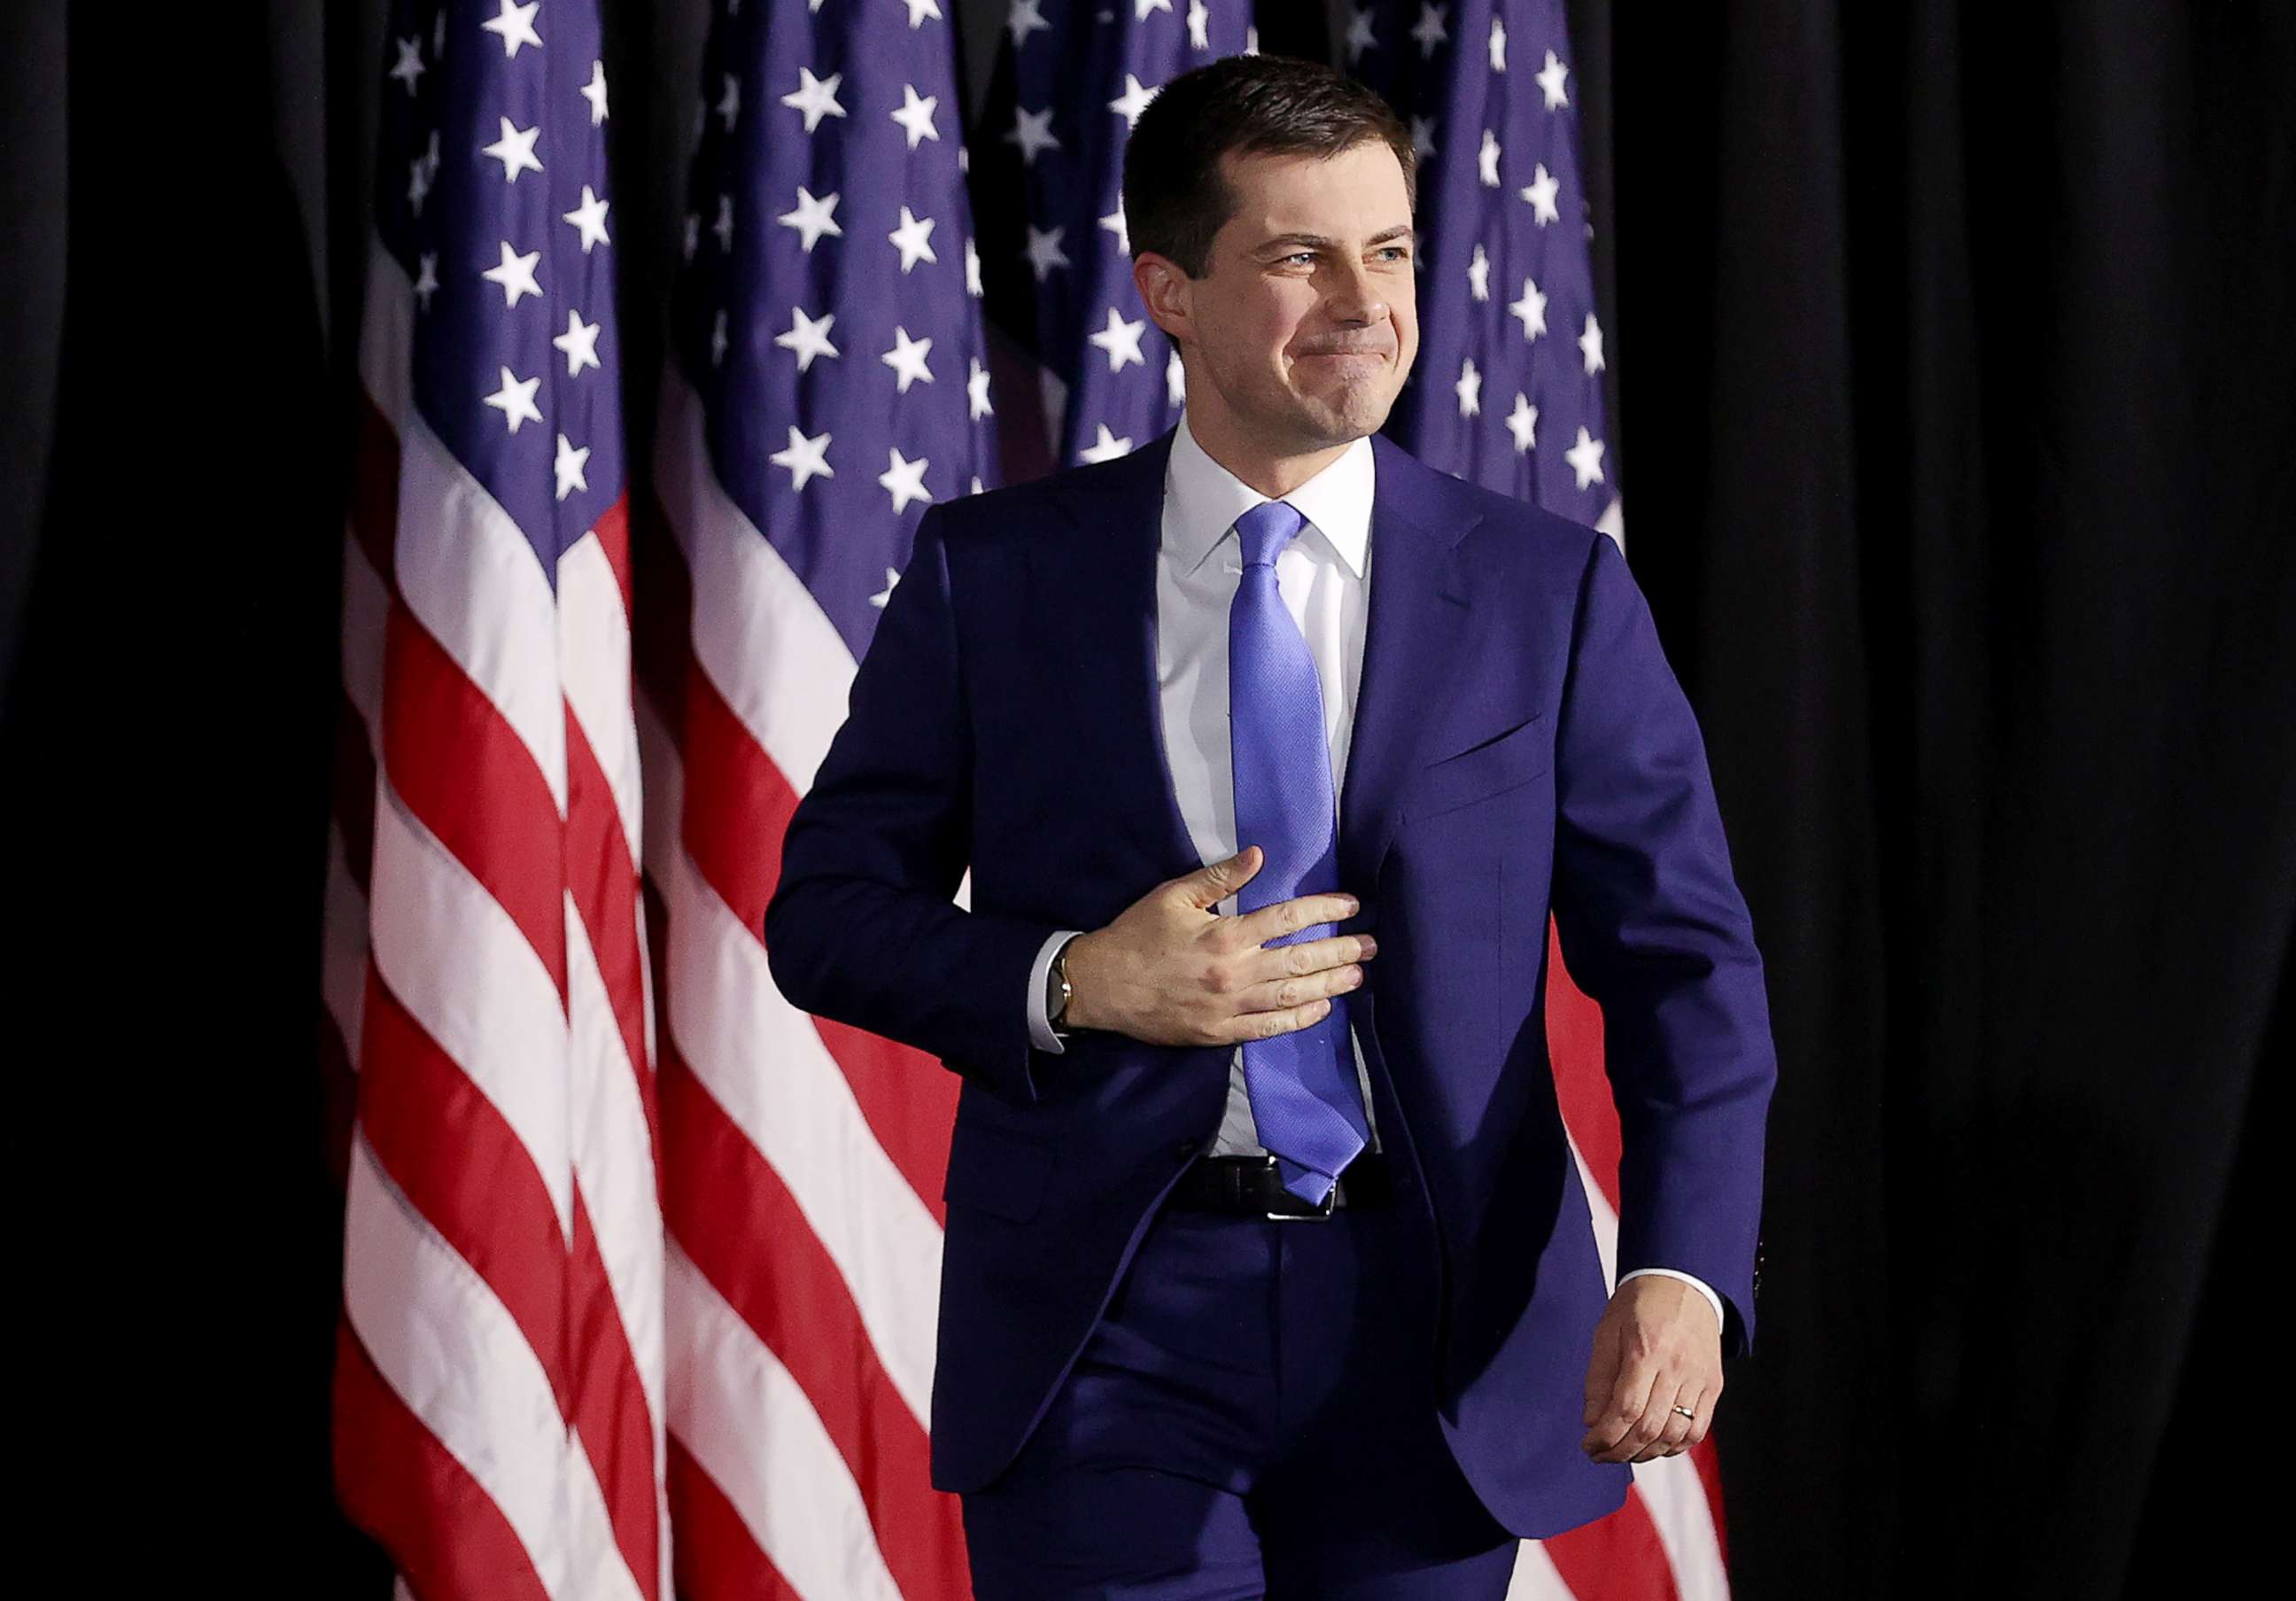 PHOTO: Democratic presidential candidate former South Bend, Indiana Mayor Pete Buttigieg arrives at a watch party at Drake University on Feb. 3, 2020 in Des Moines, Iowa.